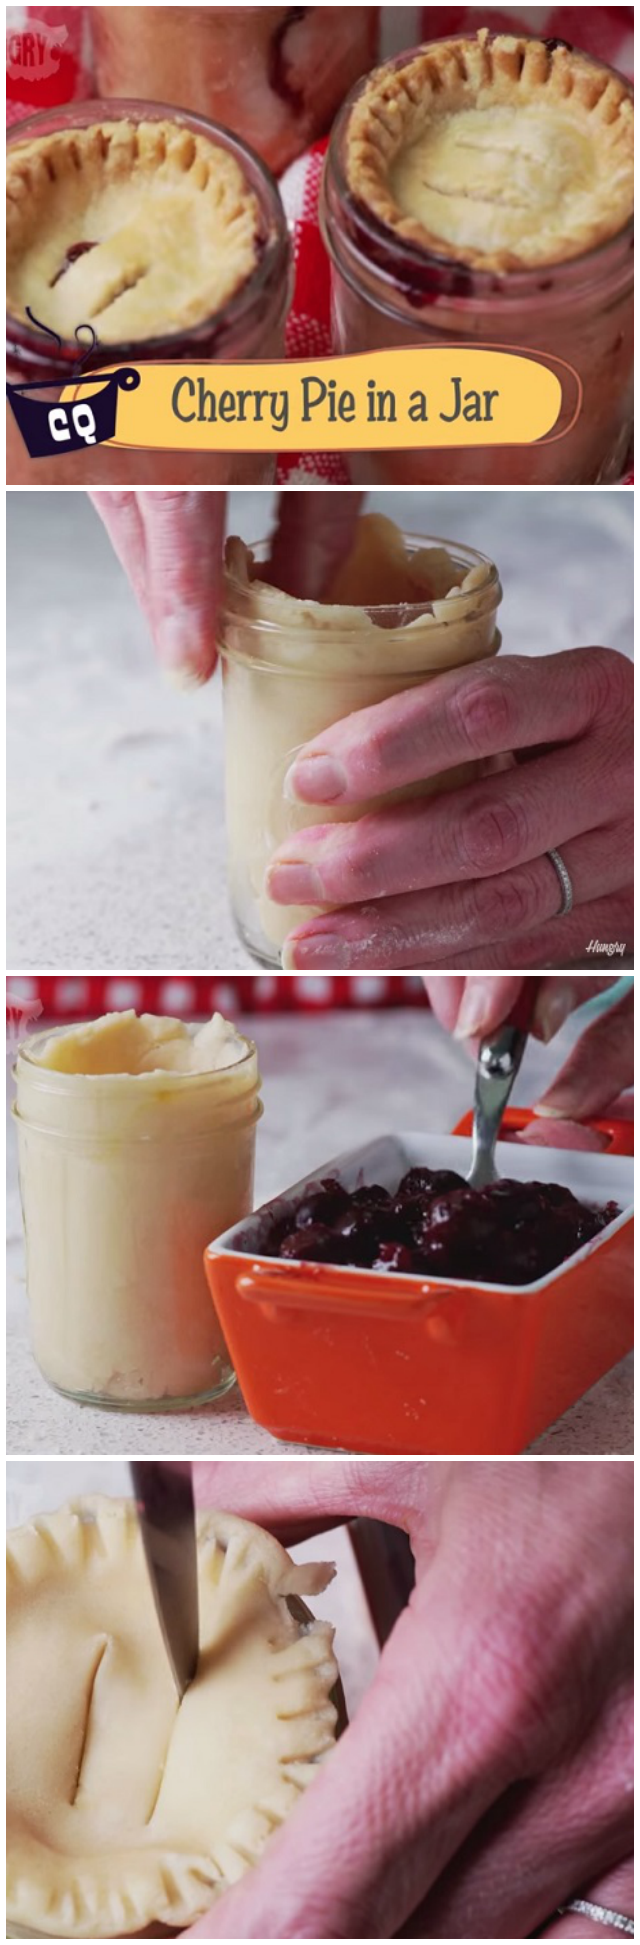 Cherry Pies in Mason Jars! - Fill a jar with pastry dough and fruit to make an exceptional dessert